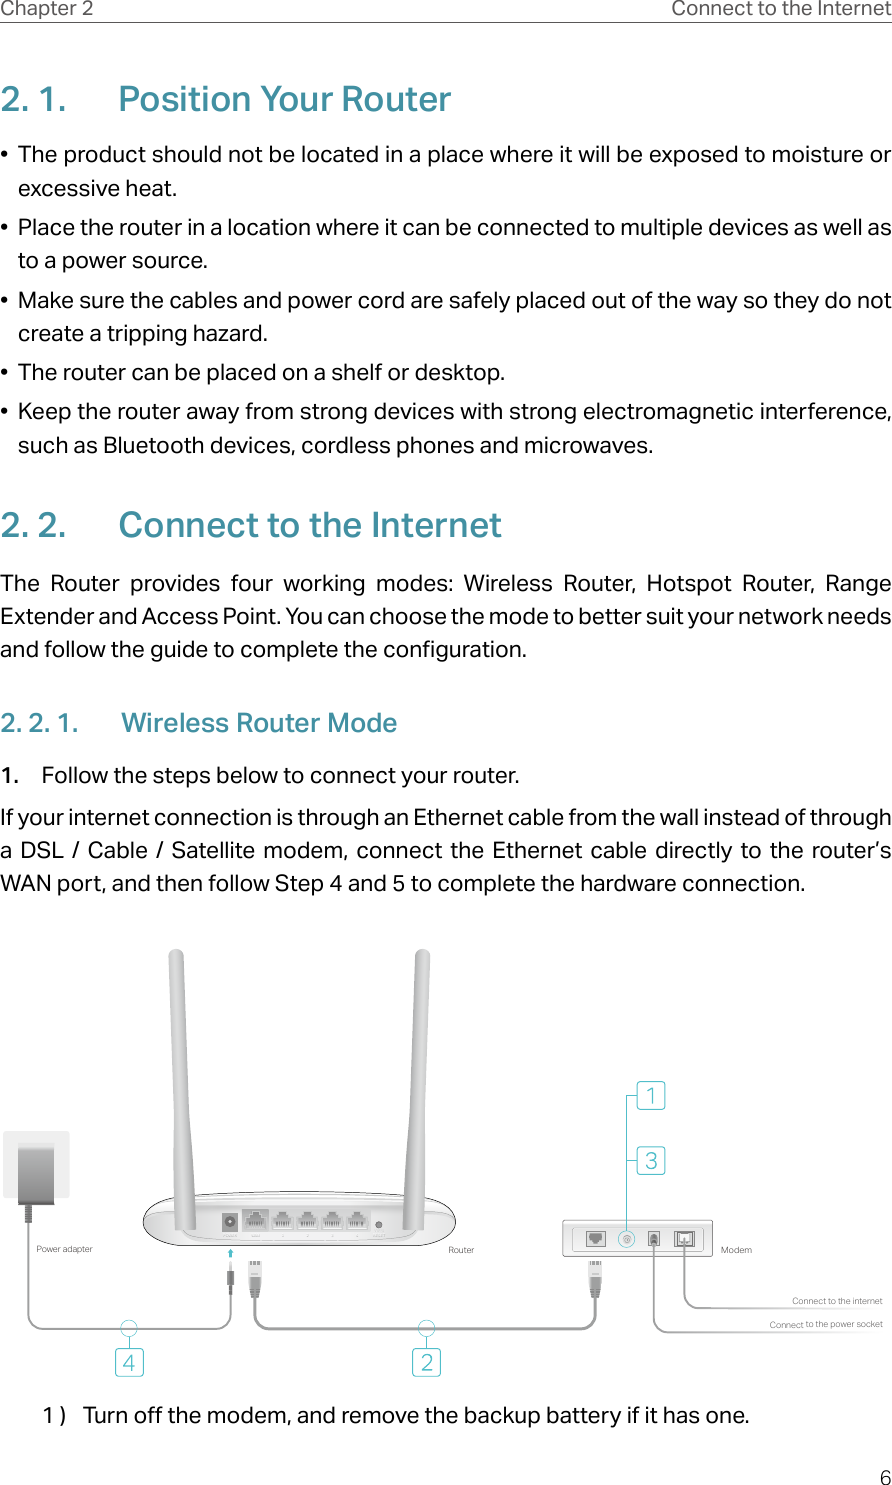 6Chapter 2 Connect to the Internet2. 1.  Position Your Router•  The product should not be located in a place where it will be exposed to moisture or excessive heat.•  Place the router in a location where it can be connected to multiple devices as well as to a power source.•  Make sure the cables and power cord are safely placed out of the way so they do not create a tripping hazard.•  The router can be placed on a shelf or desktop.•  Keep the router away from strong devices with strong electromagnetic interference, such as Bluetooth devices, cordless phones and microwaves.2. 2.  Connect to the InternetThe Router provides four working modes: Wireless Router, Hotspot Router, Range Extender and Access Point. You can choose the mode to better suit your network needs and follow the guide to complete the configuration.2. 2. 1.  Wireless Router Mode1.  Follow the steps below to connect your router.If your internet connection is through an Ethernet cable from the wall instead of through a DSL / Cable / Satellite modem, connect the Ethernet cable directly to the router’s WAN port, and then follow Step 4 and 5 to complete the hardware connection.Connect to the power socketConnect to the internetModemRouterPower adapterPOWER WAN 1 2 3 4 WPS/RESETPOWER WAN 1 2 3 4 WPS/RESET1 )  Turn off the modem, and remove the backup battery if it has one.